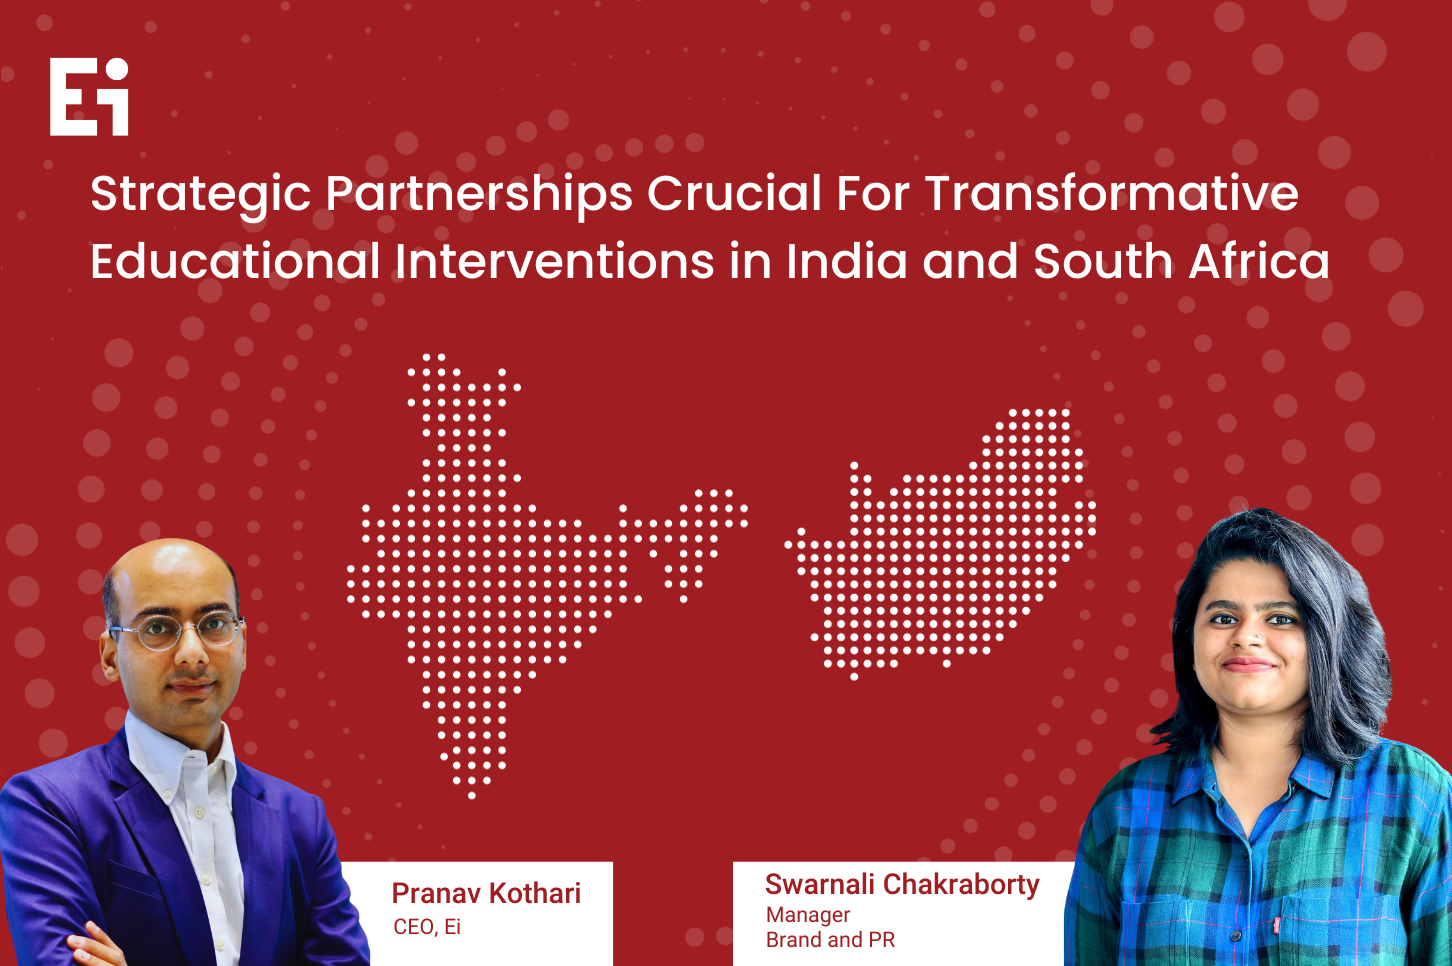 Strategic Partnerships Crucial For Transformative Educational Interventions in India and South Africa